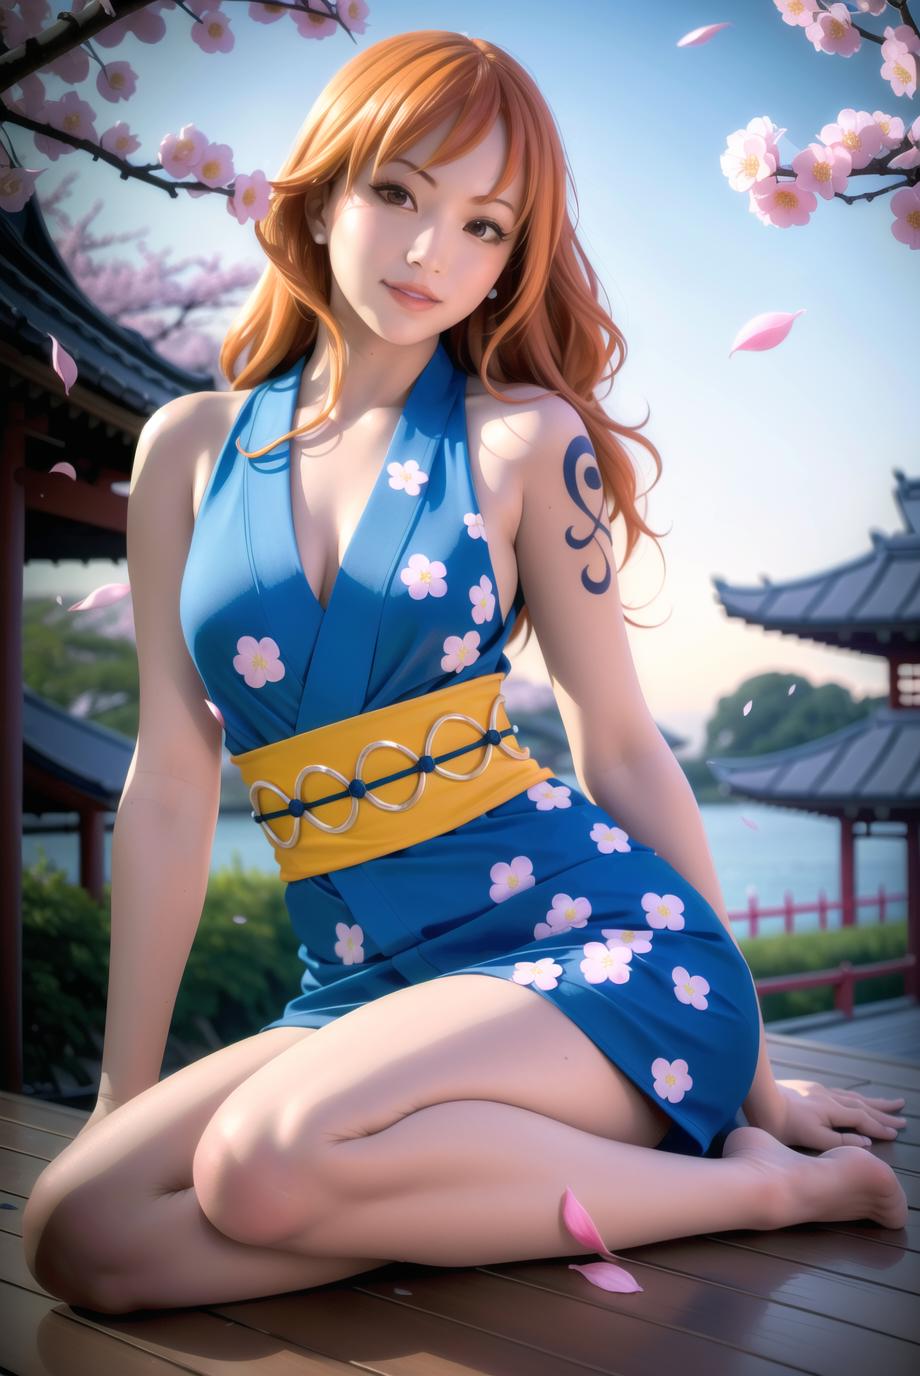 A young woman in a blue dress posing in front of a pagoda.